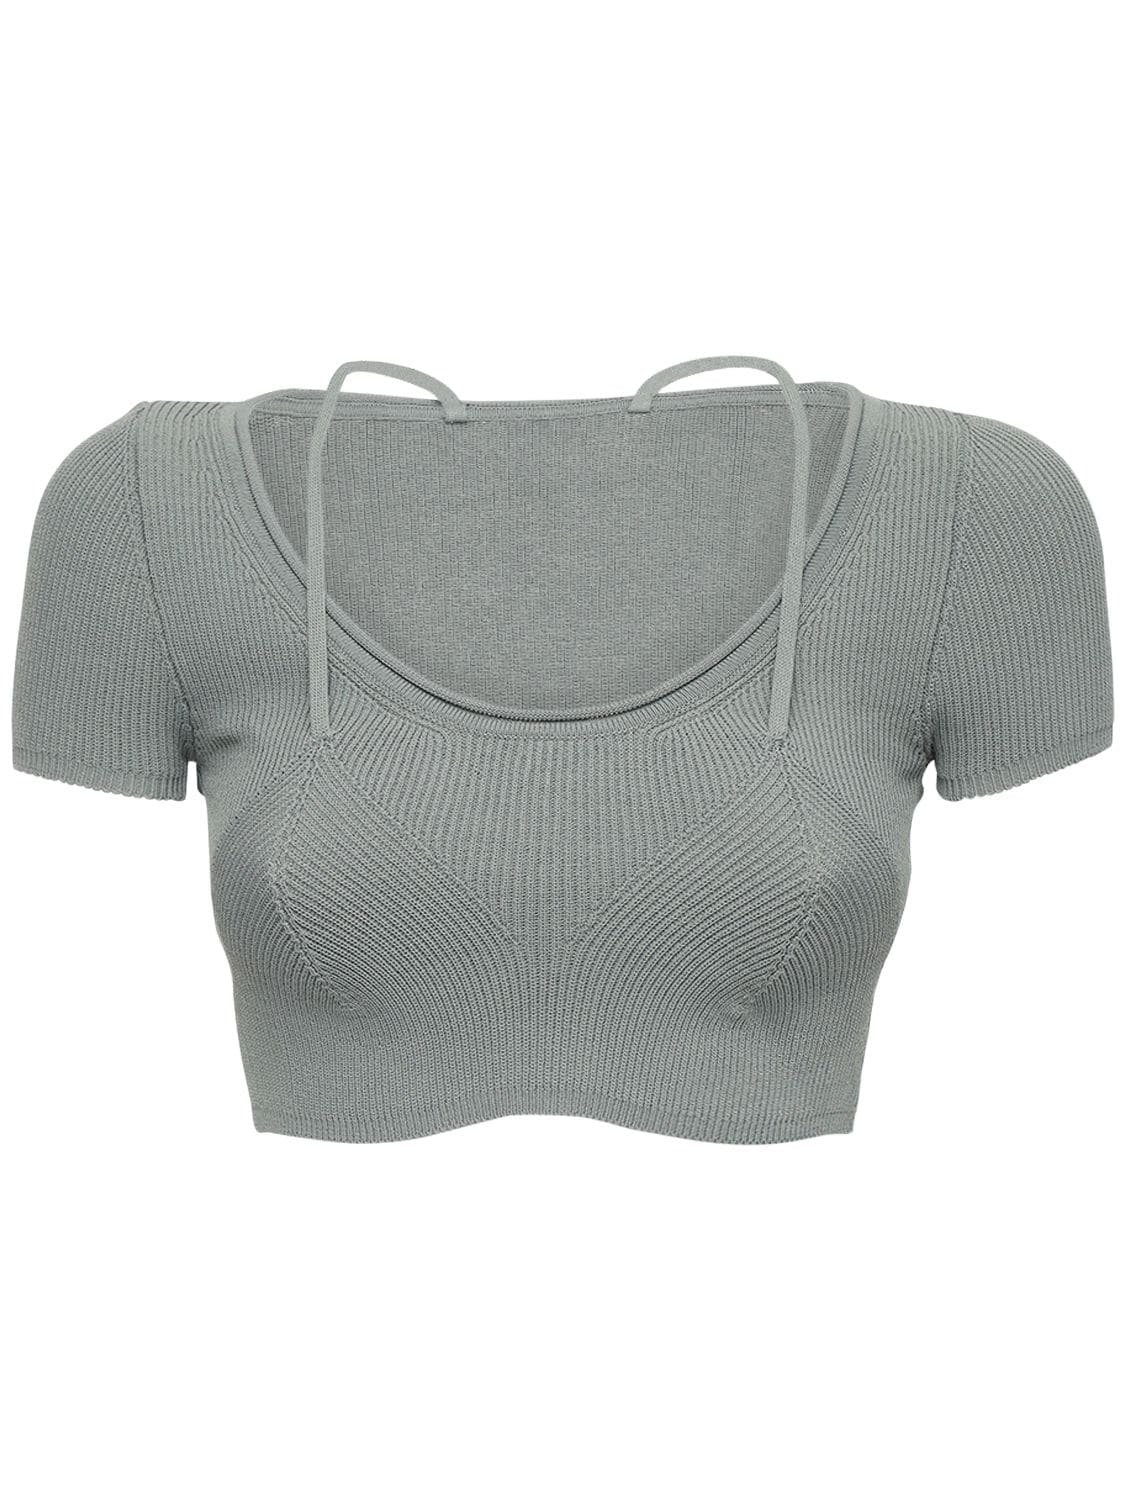 Jacquemus Knit Viscose Blend Crop Bra Top In Military Green